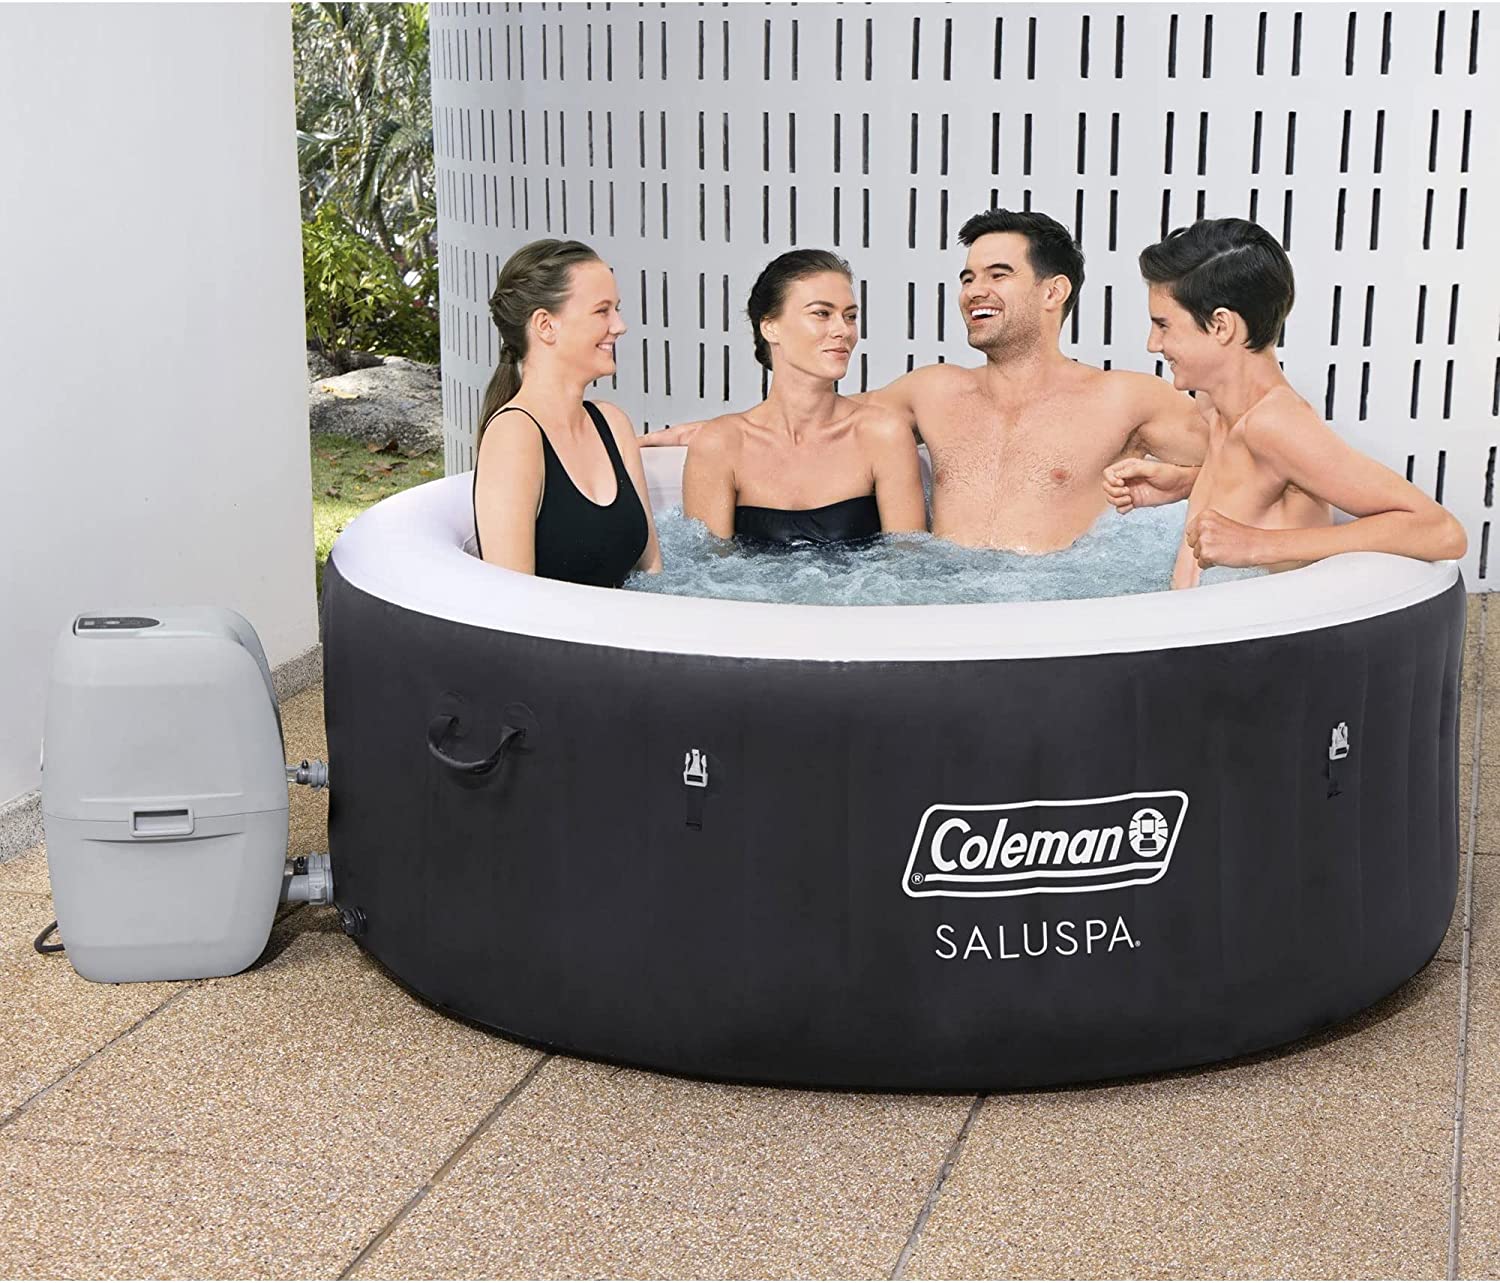 Prime Day Deals on Inflatable Hot Tubs